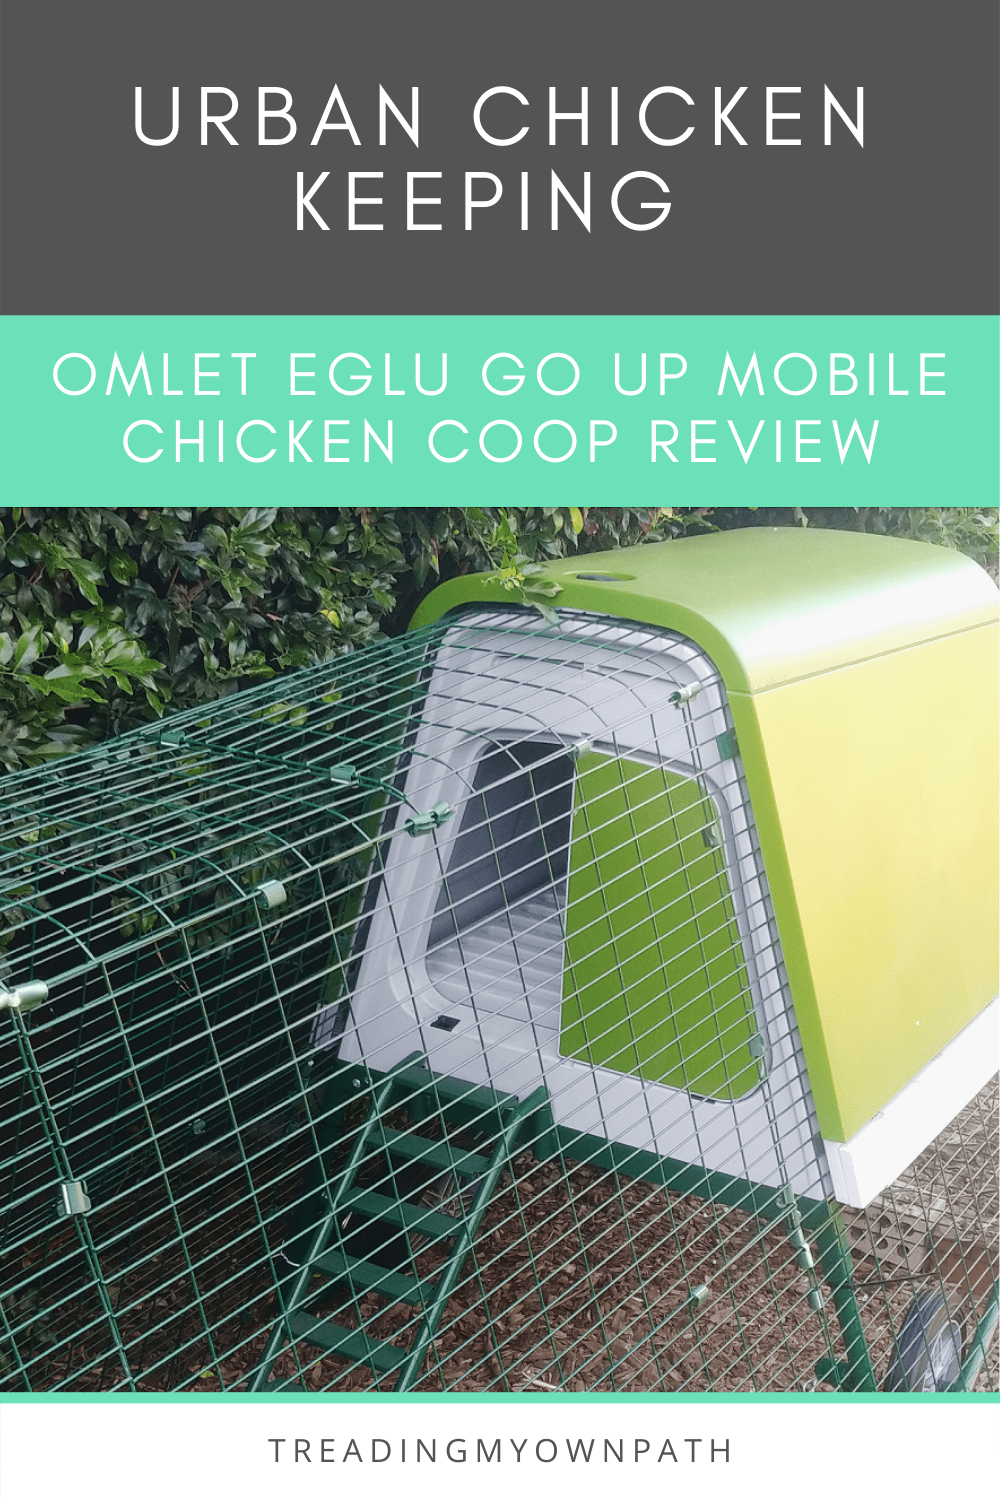 Keeping chickens: an Omlet Eglu Chicken Coop Review